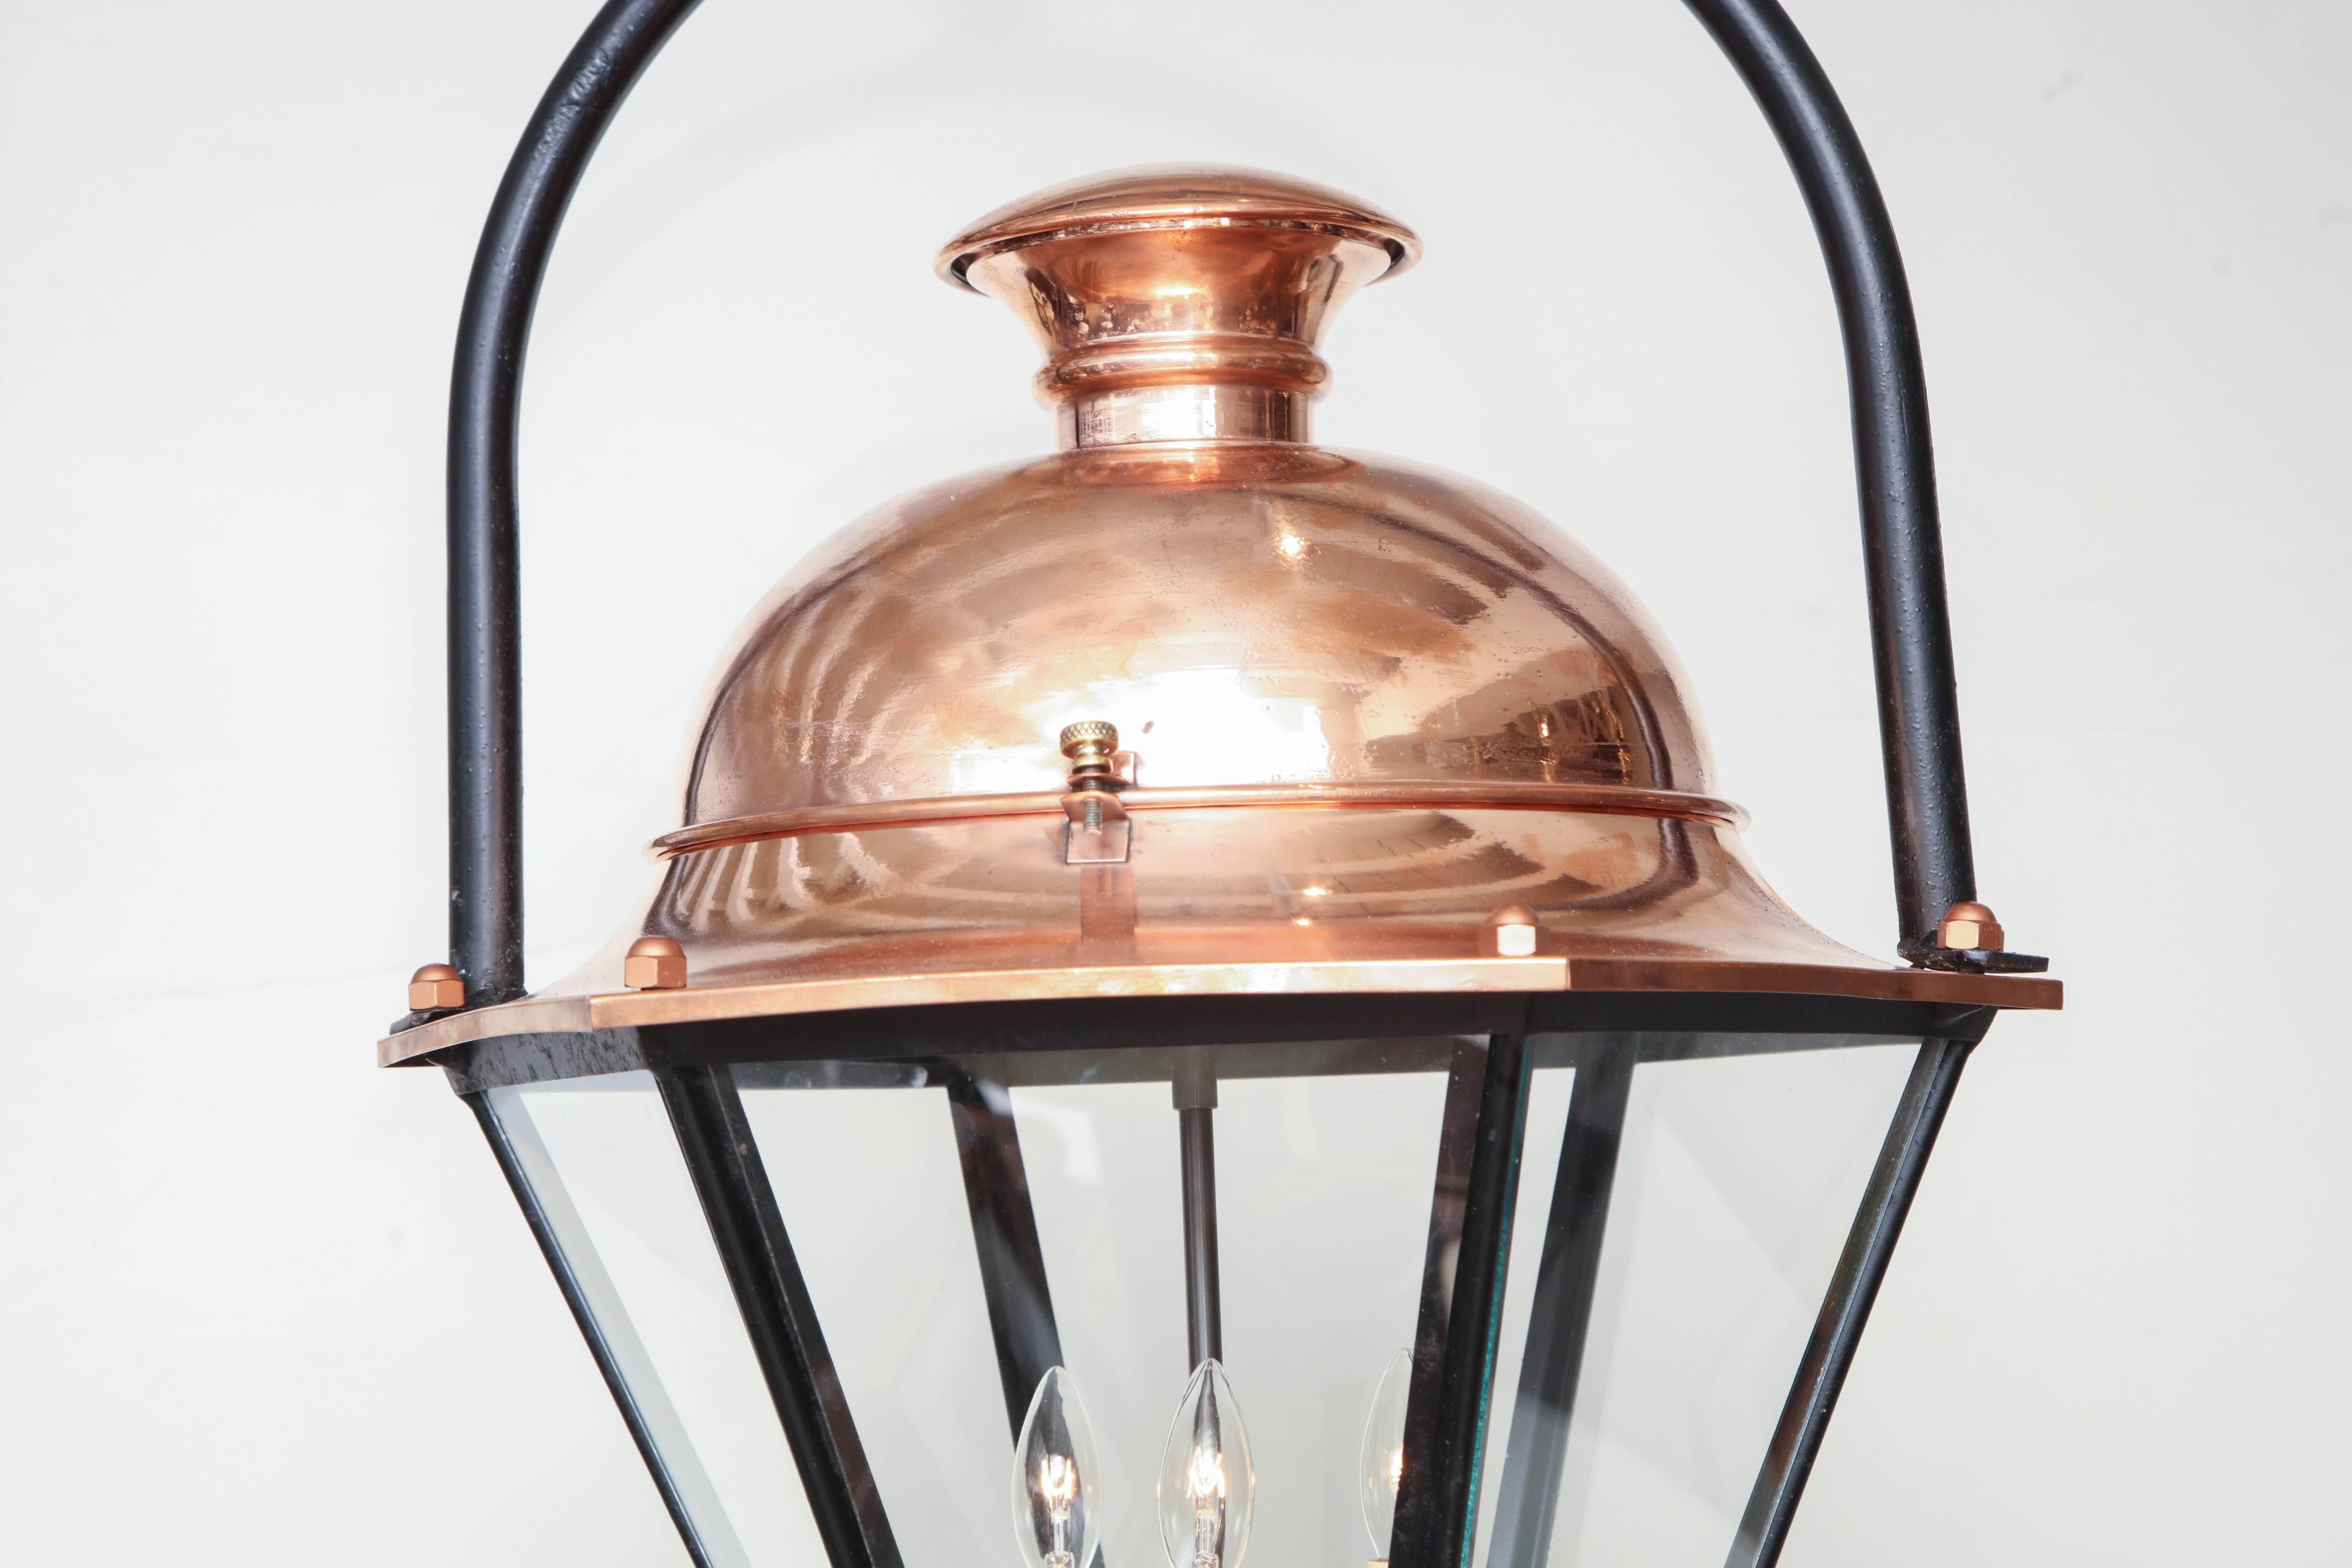 20th Century Copper and Glass Lantern/Pendant with Iron Ring Hanger, circa 1900 For Sale 3